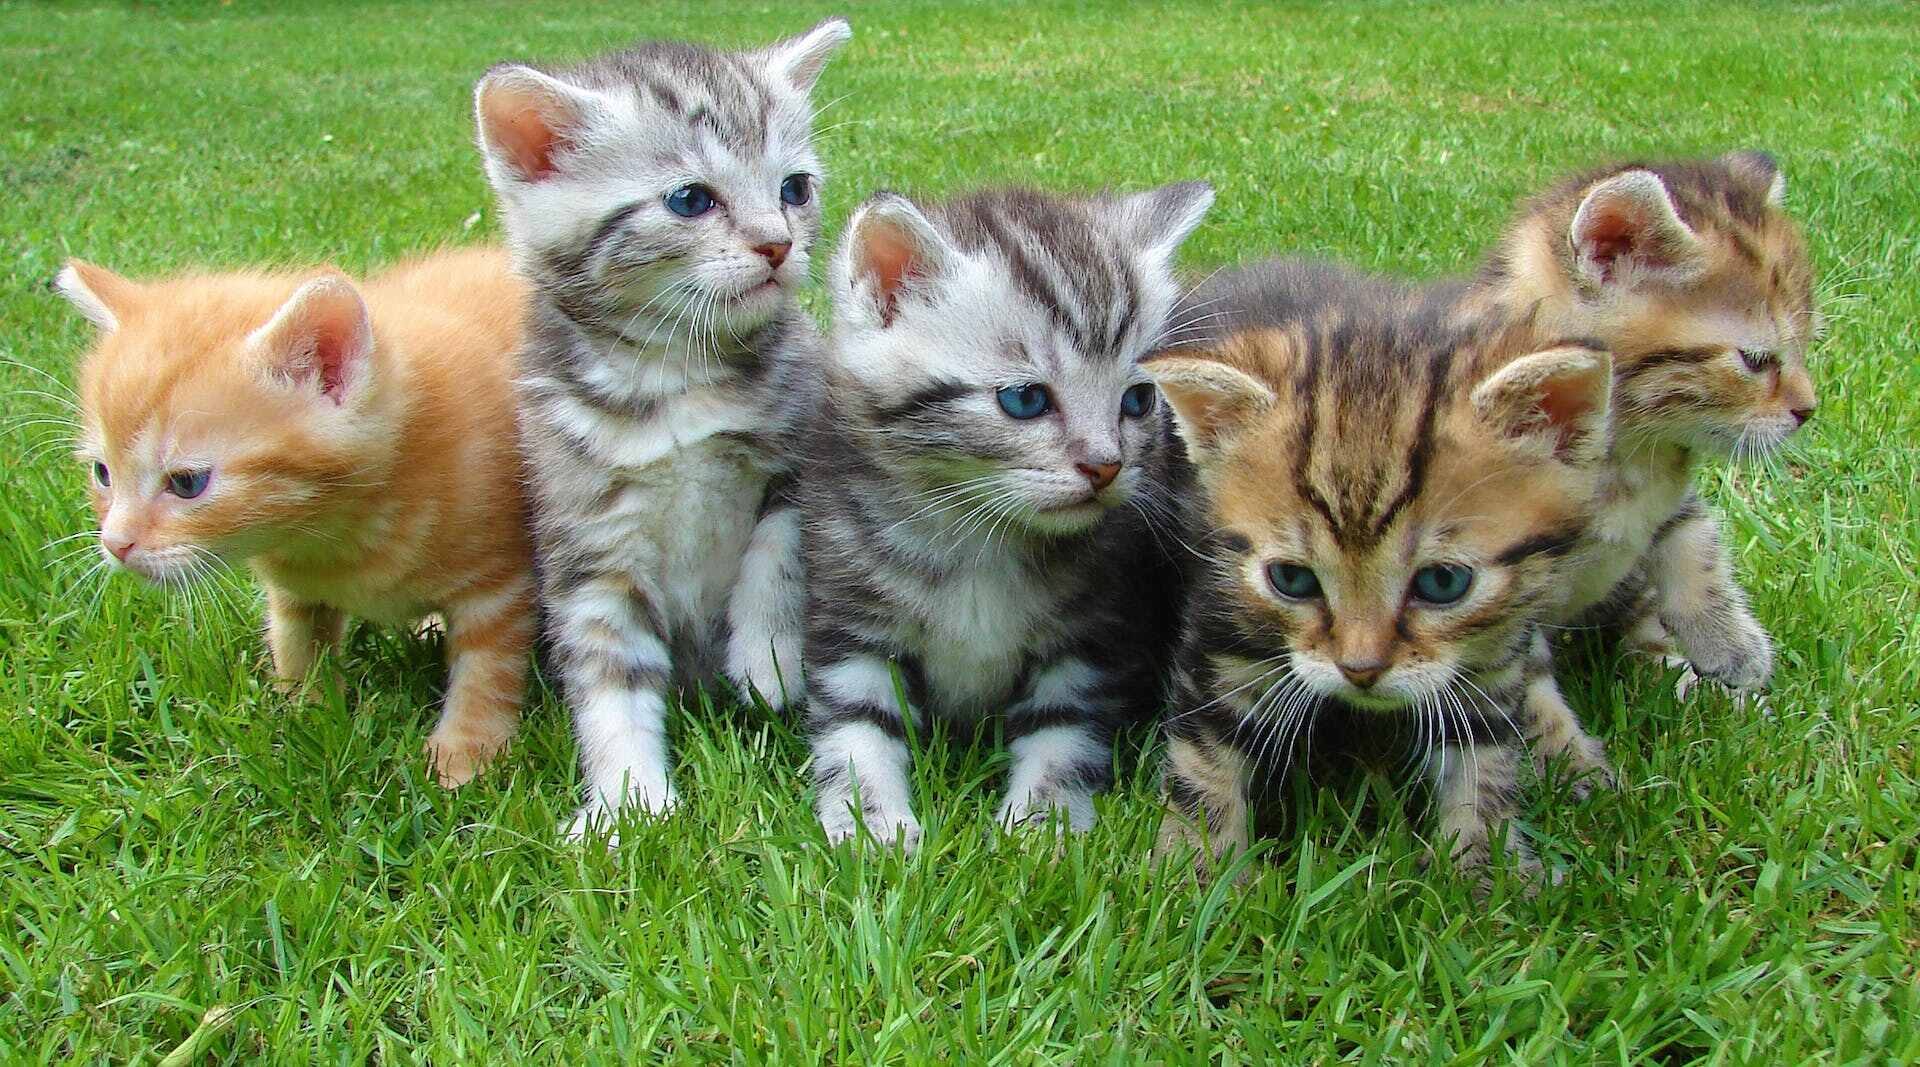 A litter of kittens in different colors